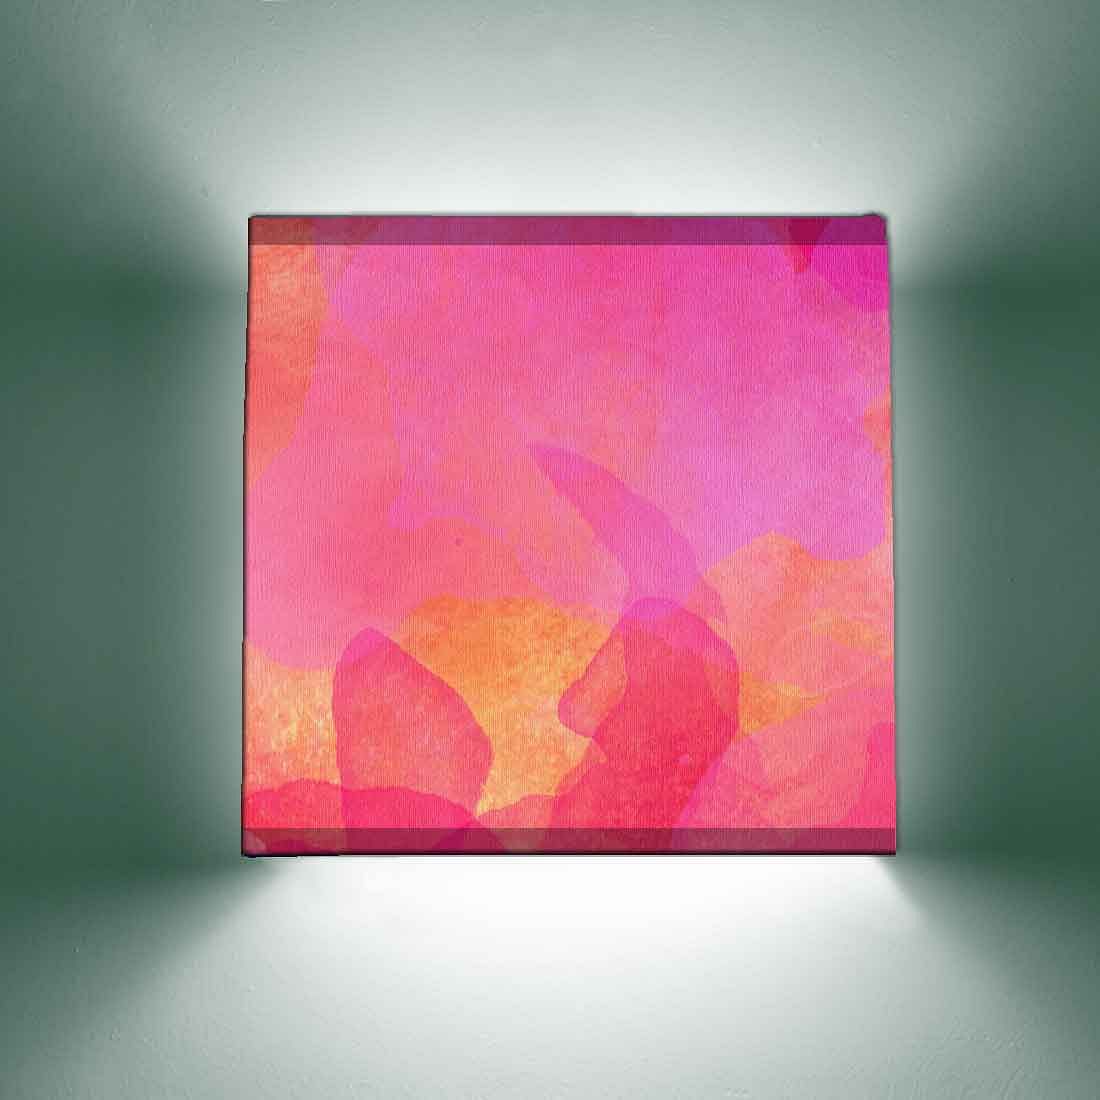 Pink Wall Lamp Square Shaped Lights Nutcase